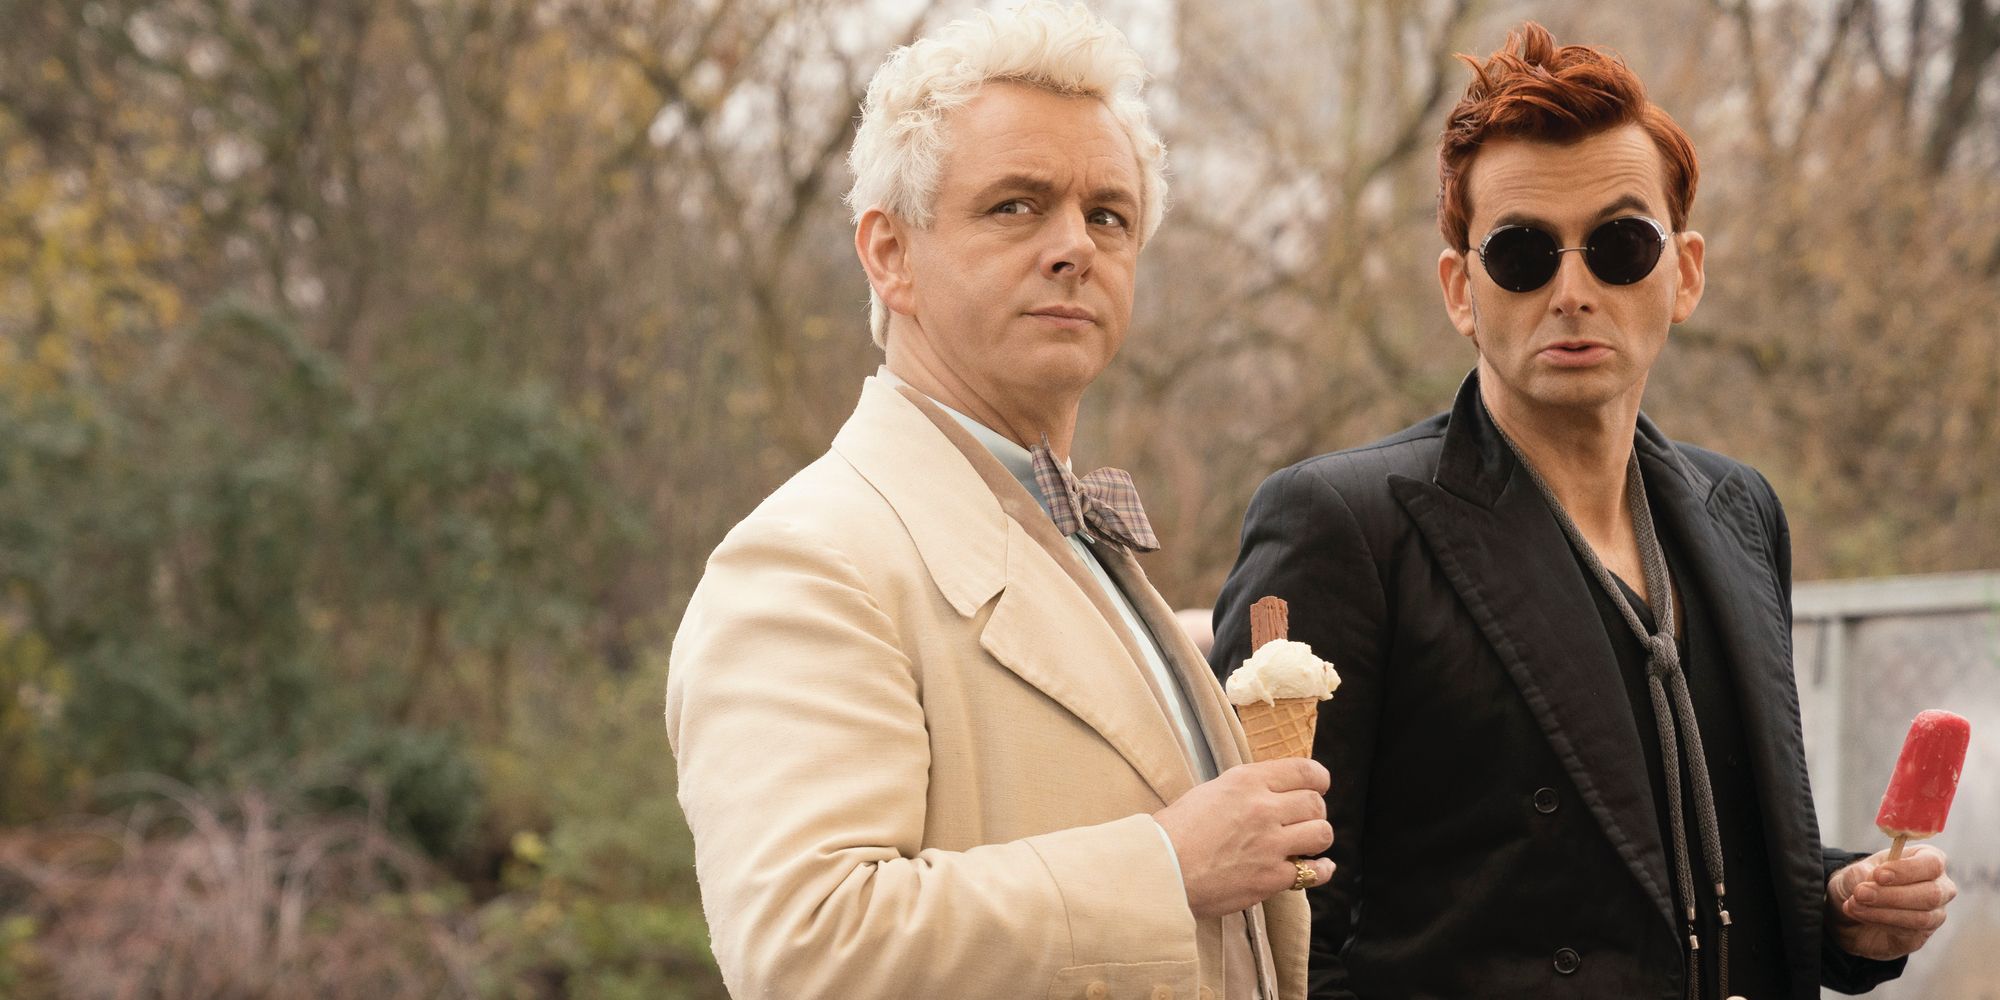 What Will Good Omens Season 2 Be About?